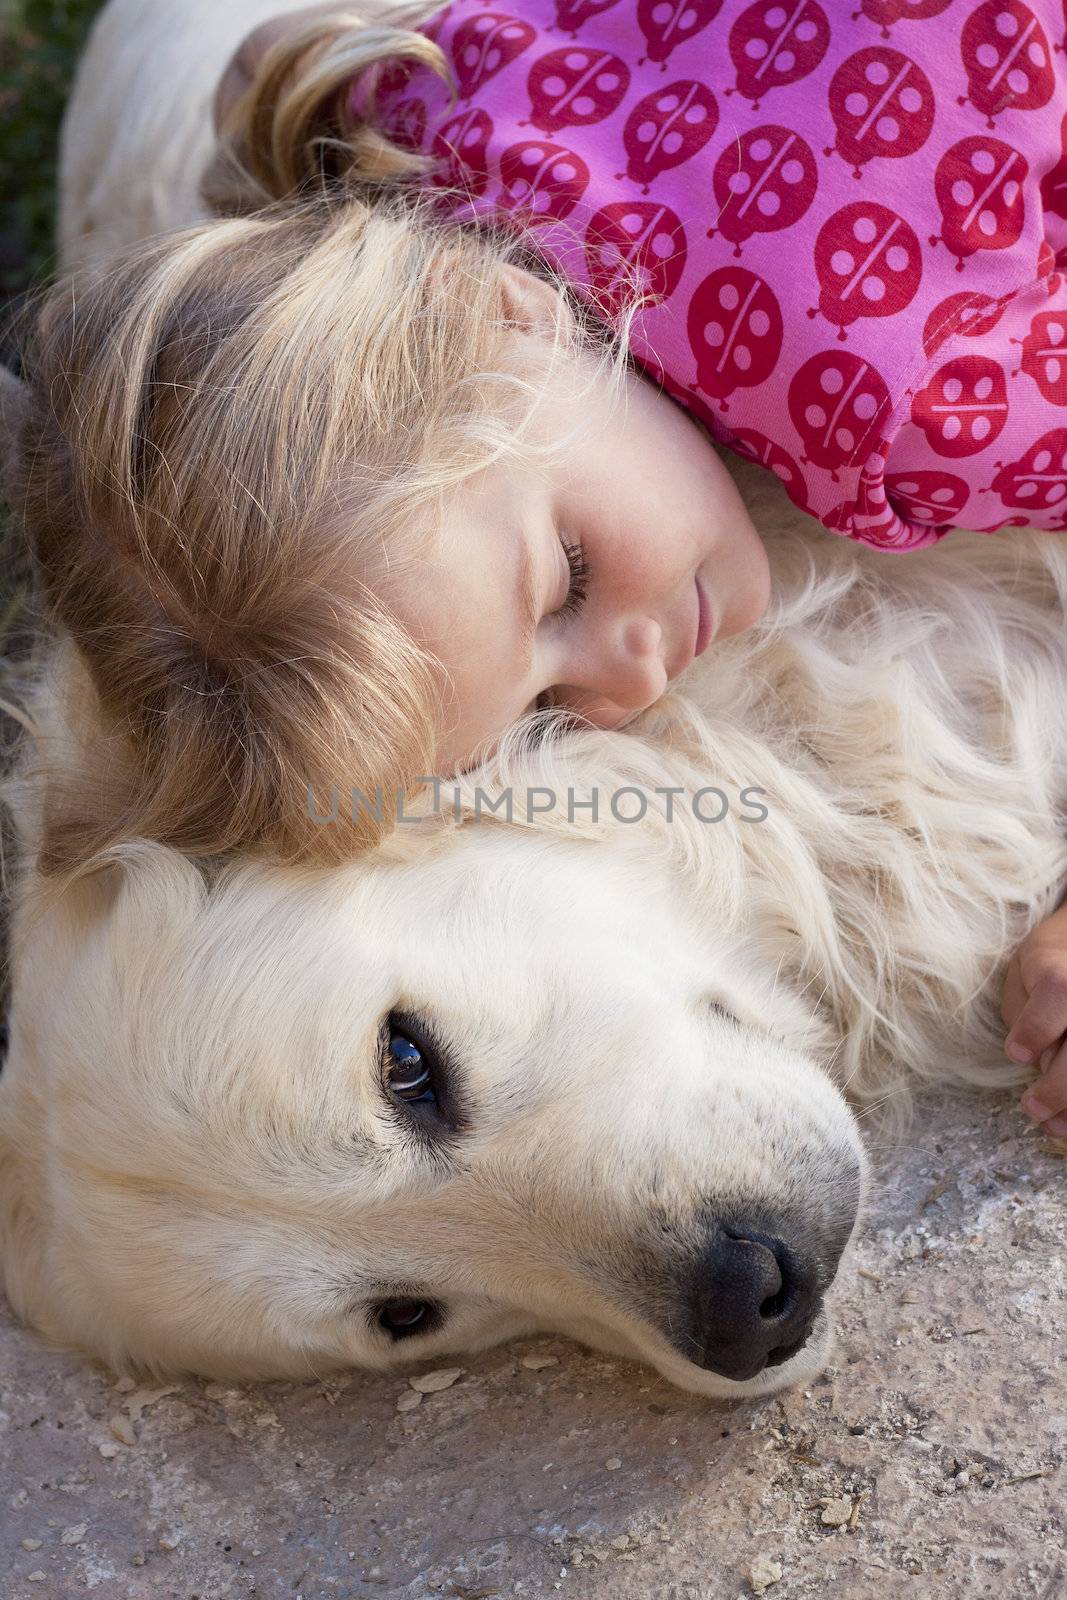 A young child sleeping with her golden retriever guarding her, Candid shot of real people